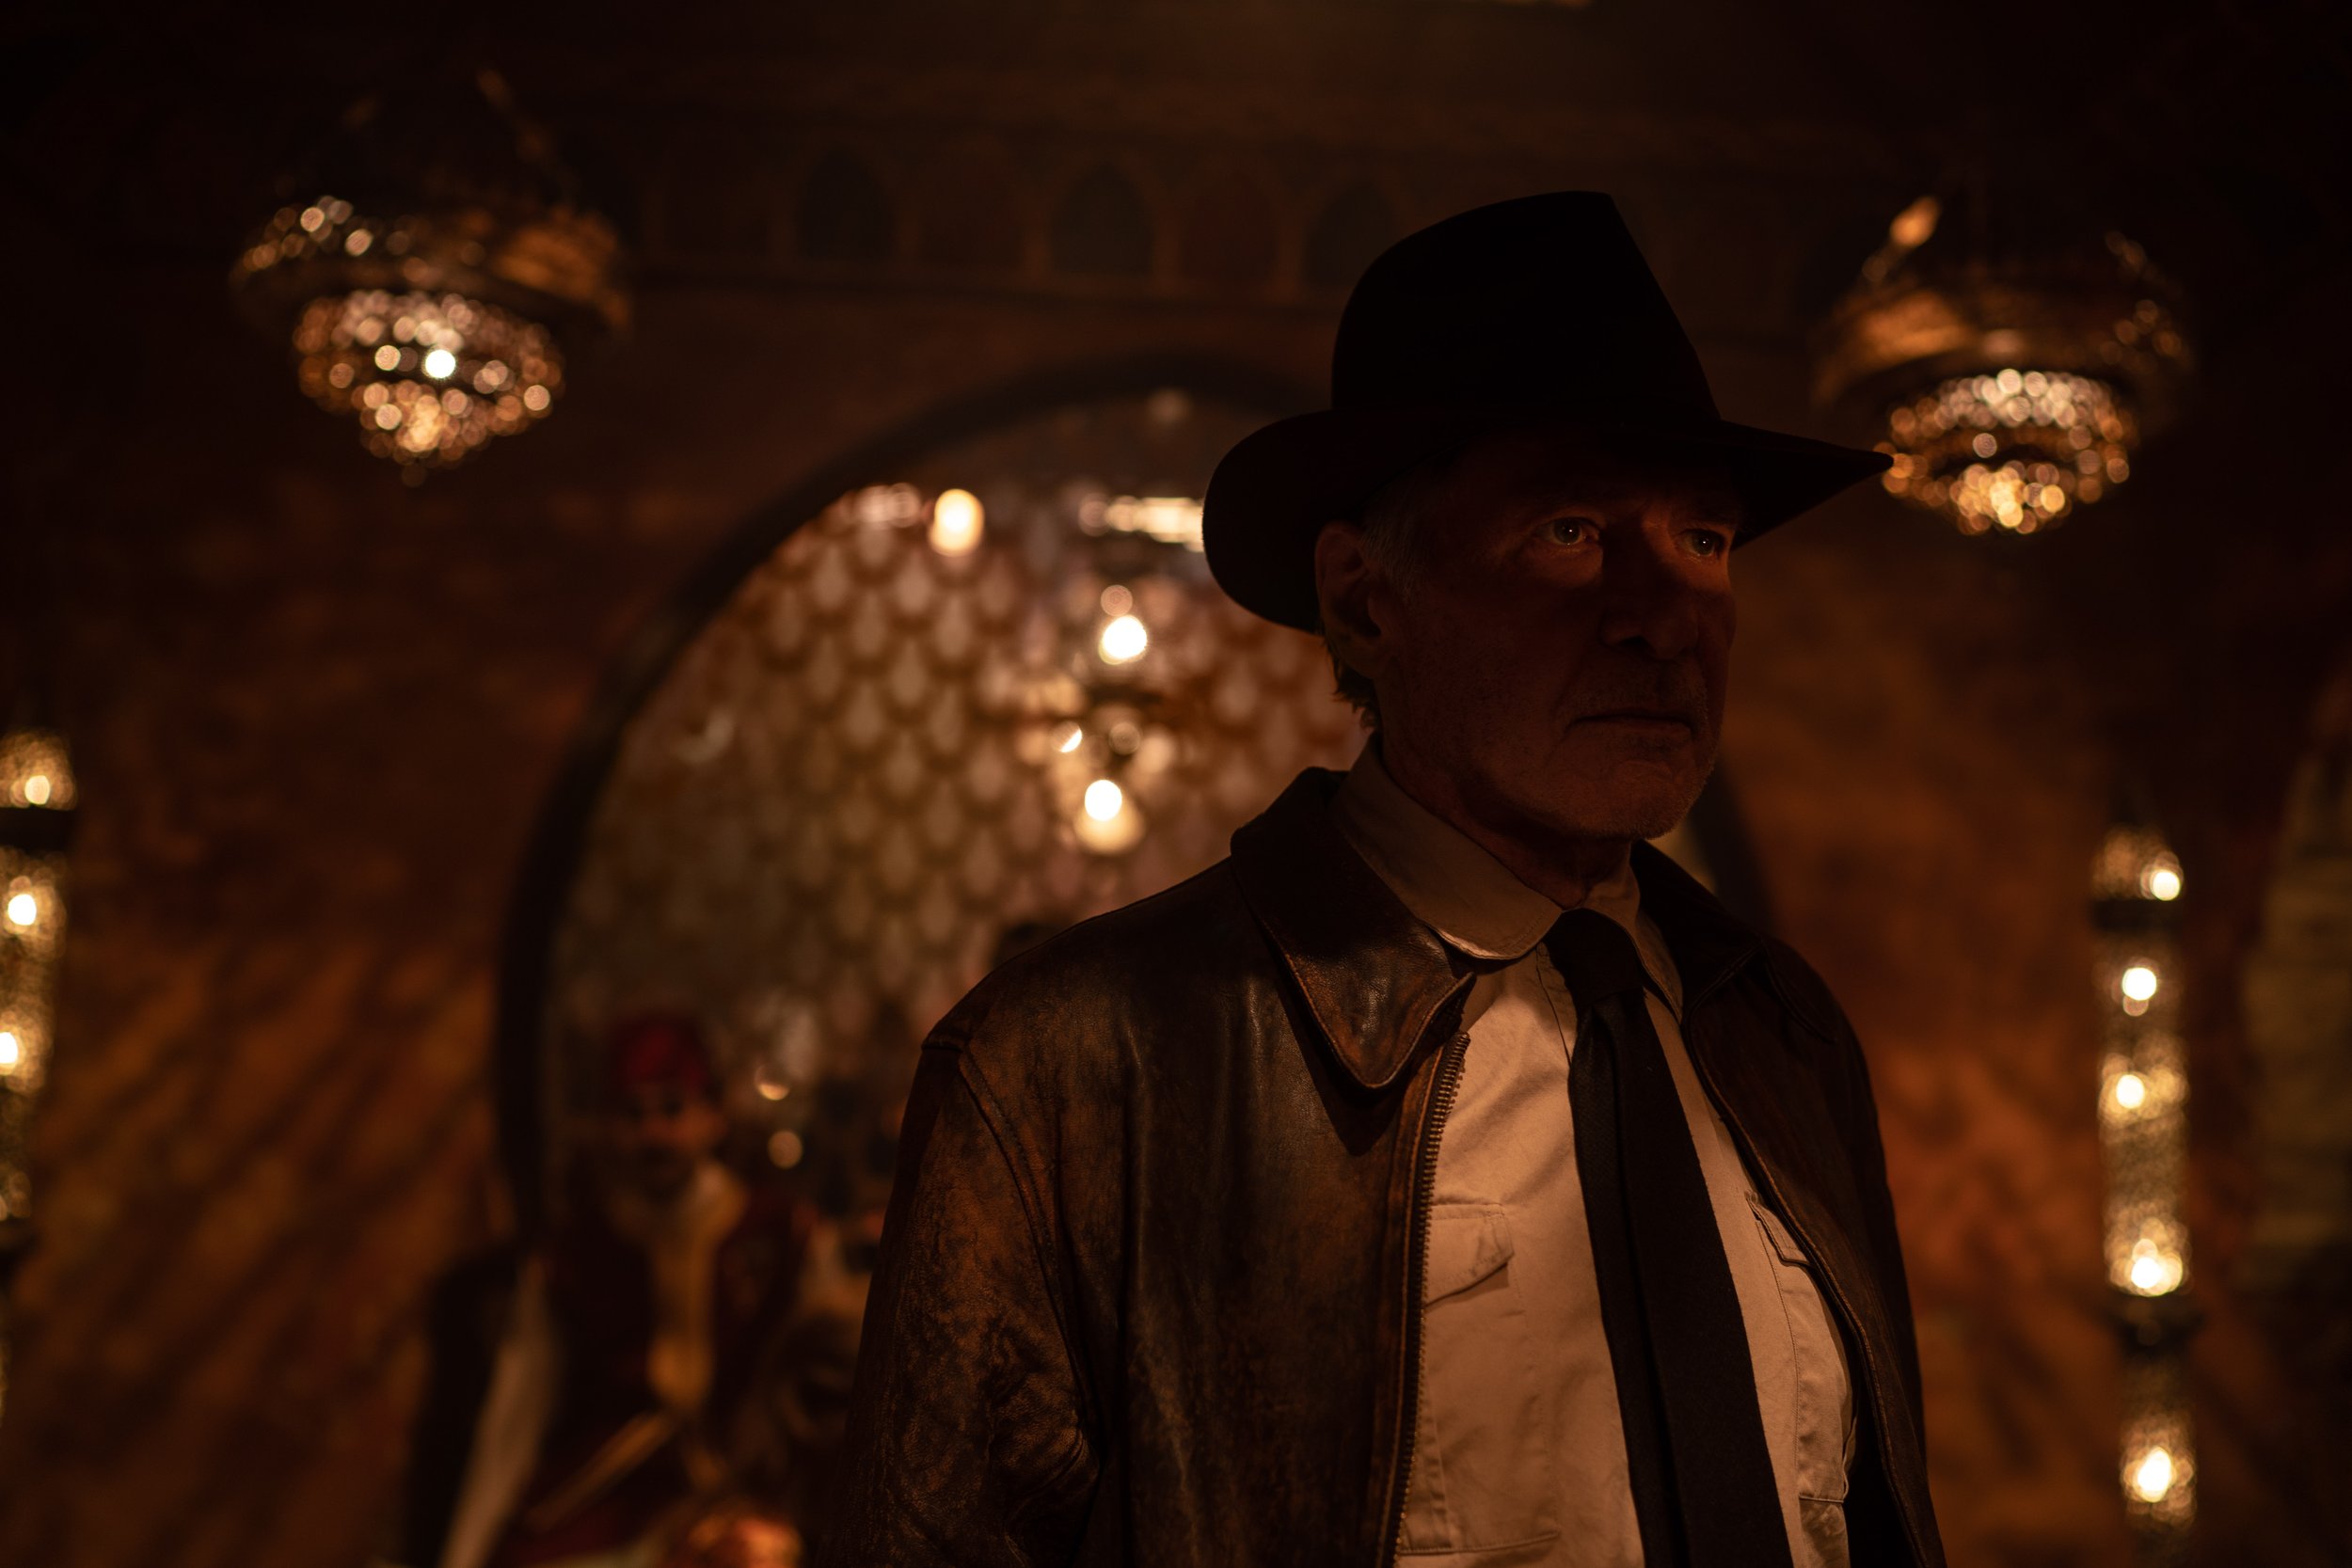  Indiana Jones (Harrison Ford) in Lucasfilm's IJ5. ©2022 Lucasfilm Ltd. & TM. All Rights Reserved. 